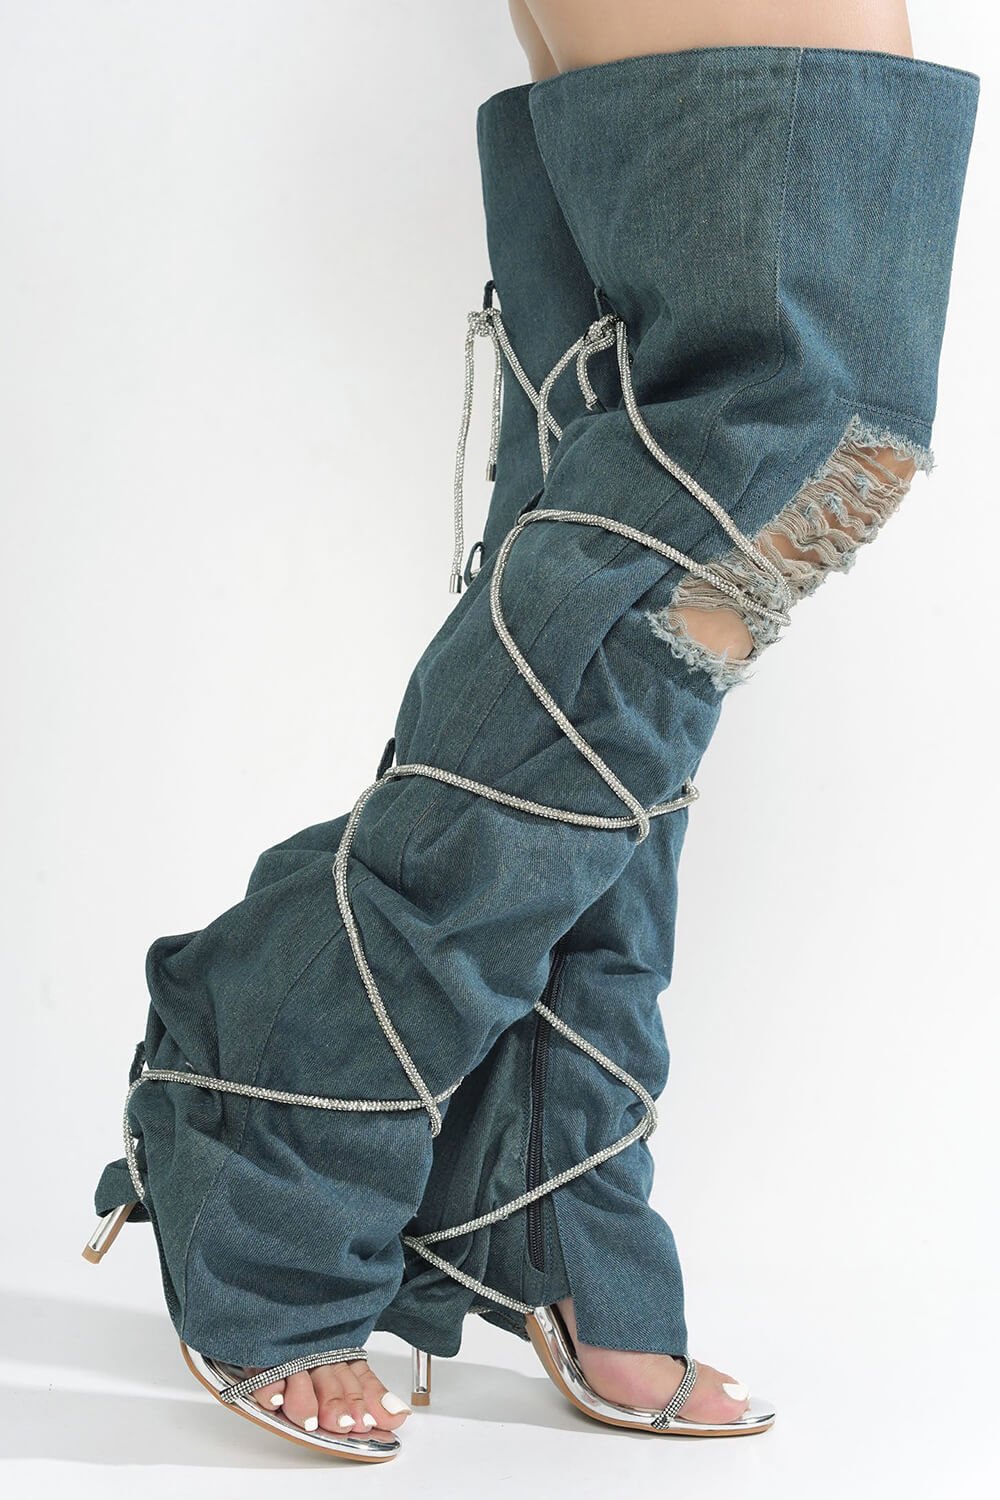 Rhinestone Rope Wrap Lace Up Fold Over Over The Knee Boots - Blue